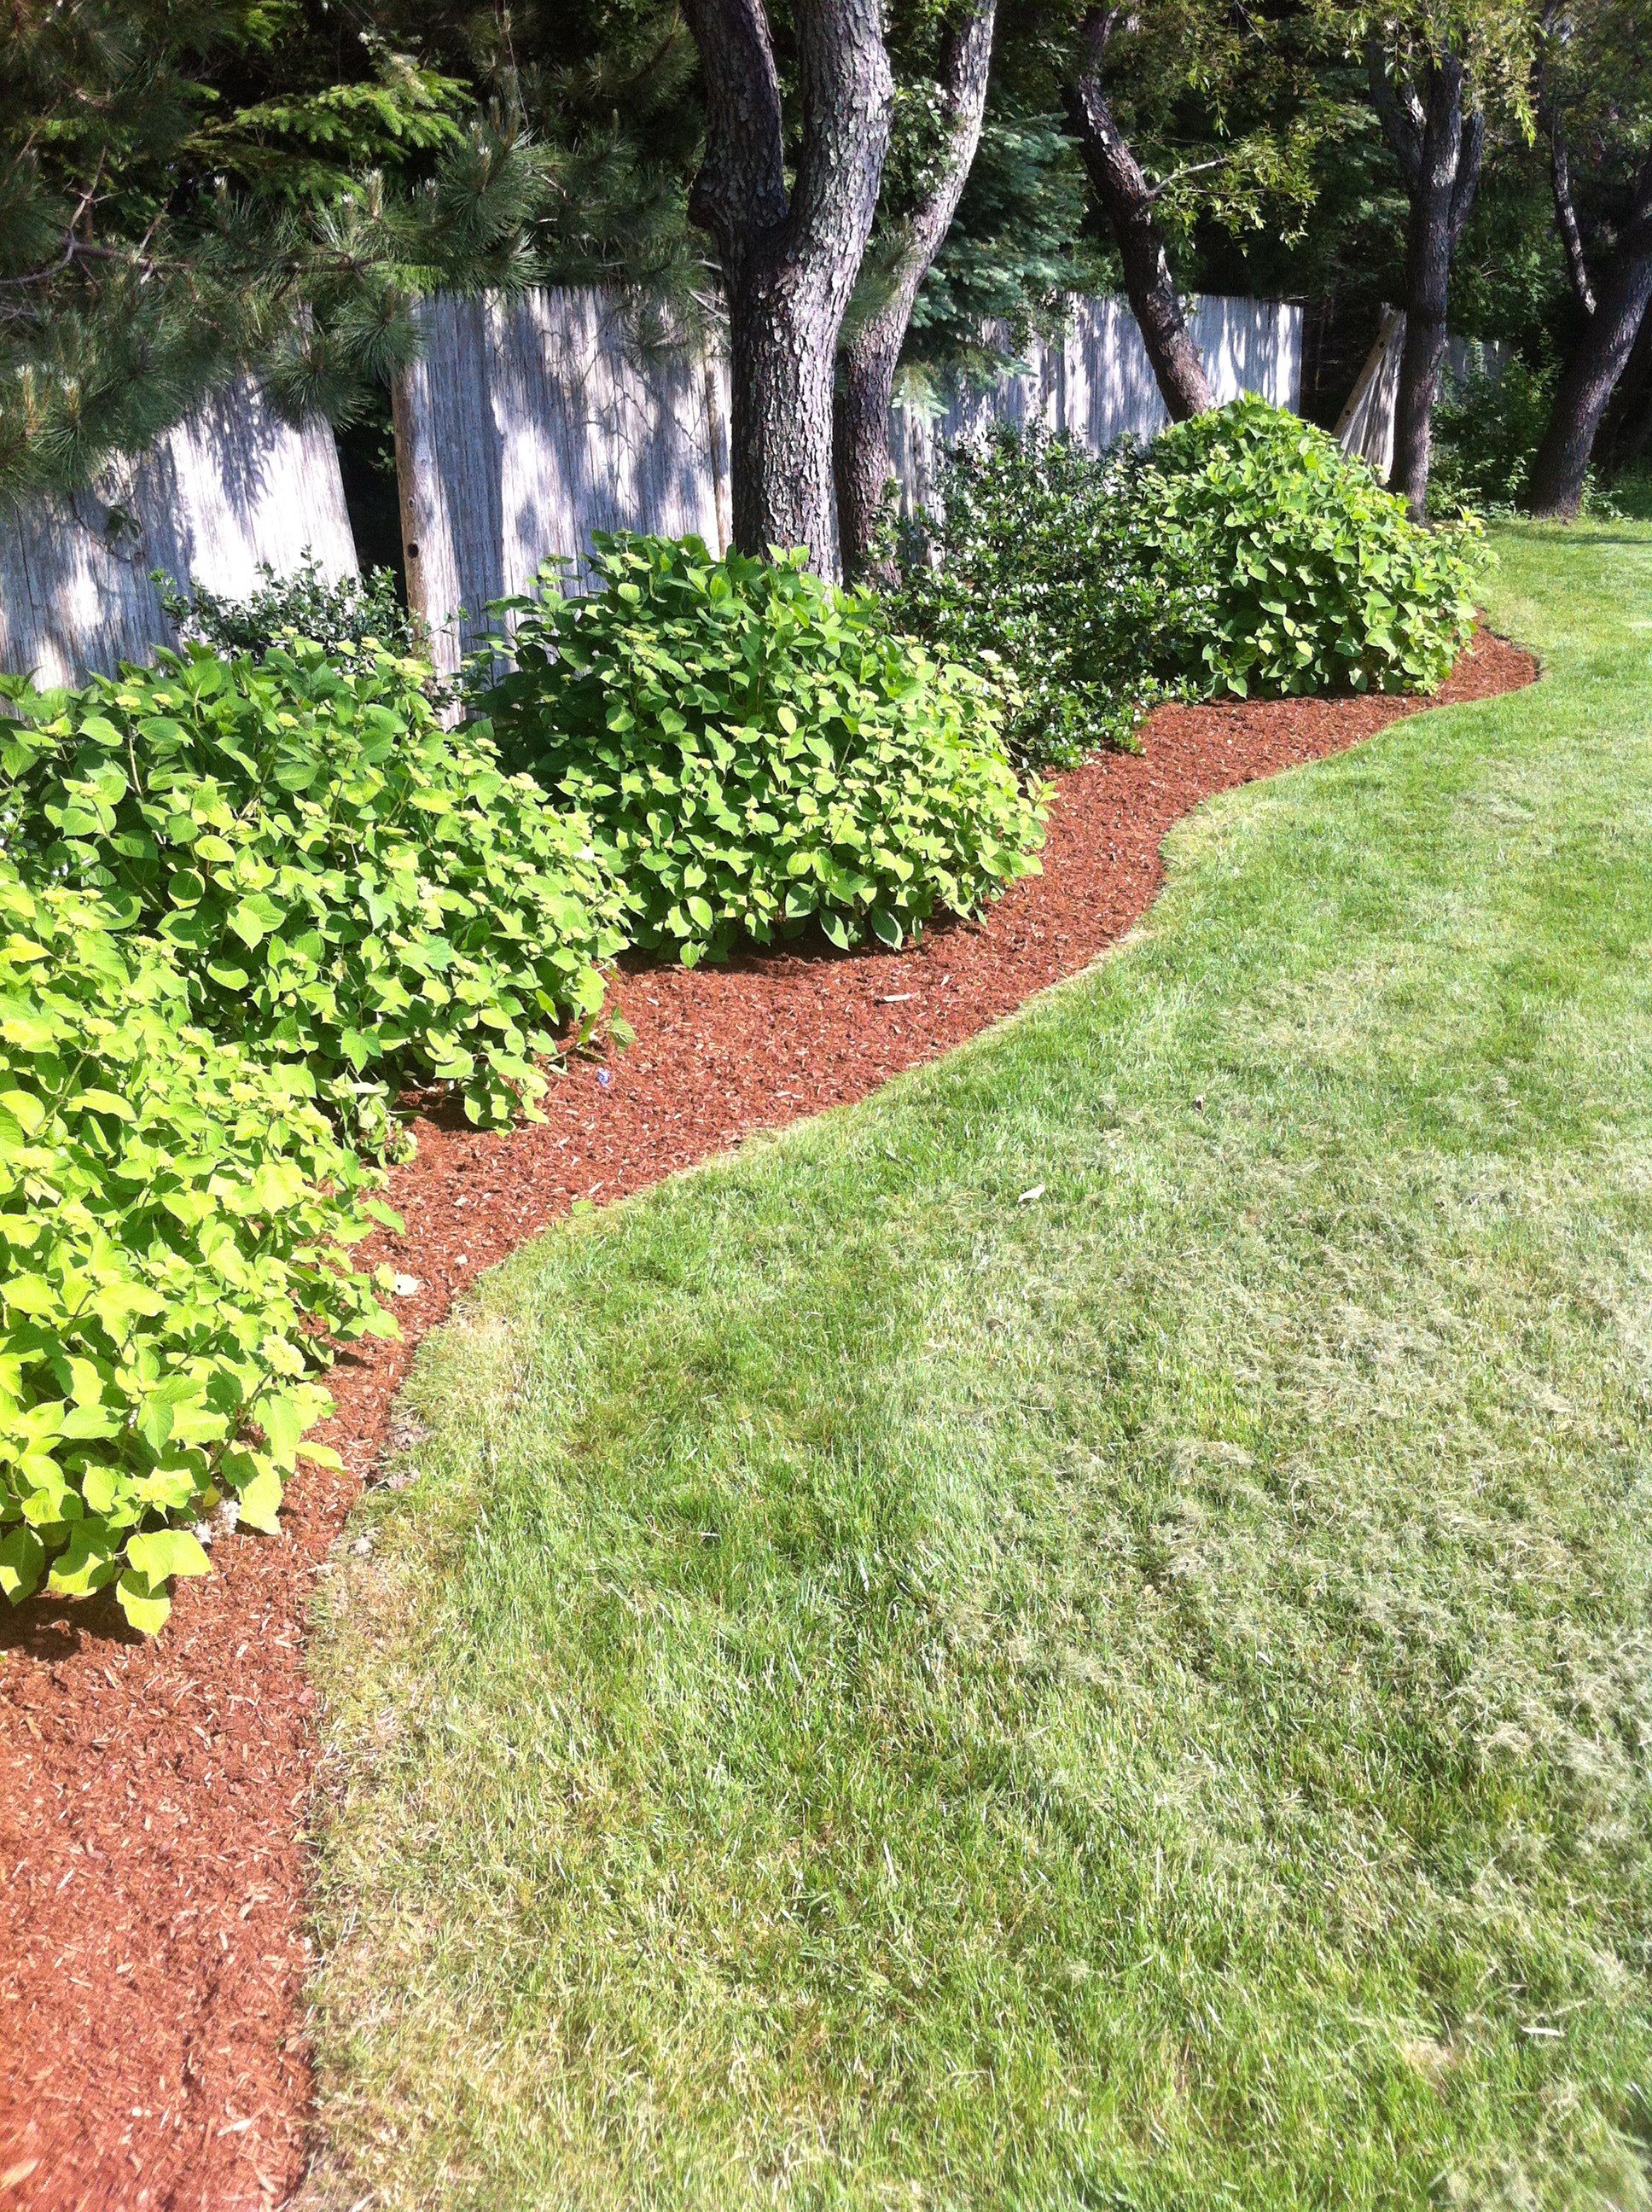  Landscaping Ideas For A Low Maintenance Yard - Low Maintenance Front Lawn Landscaping Ideas